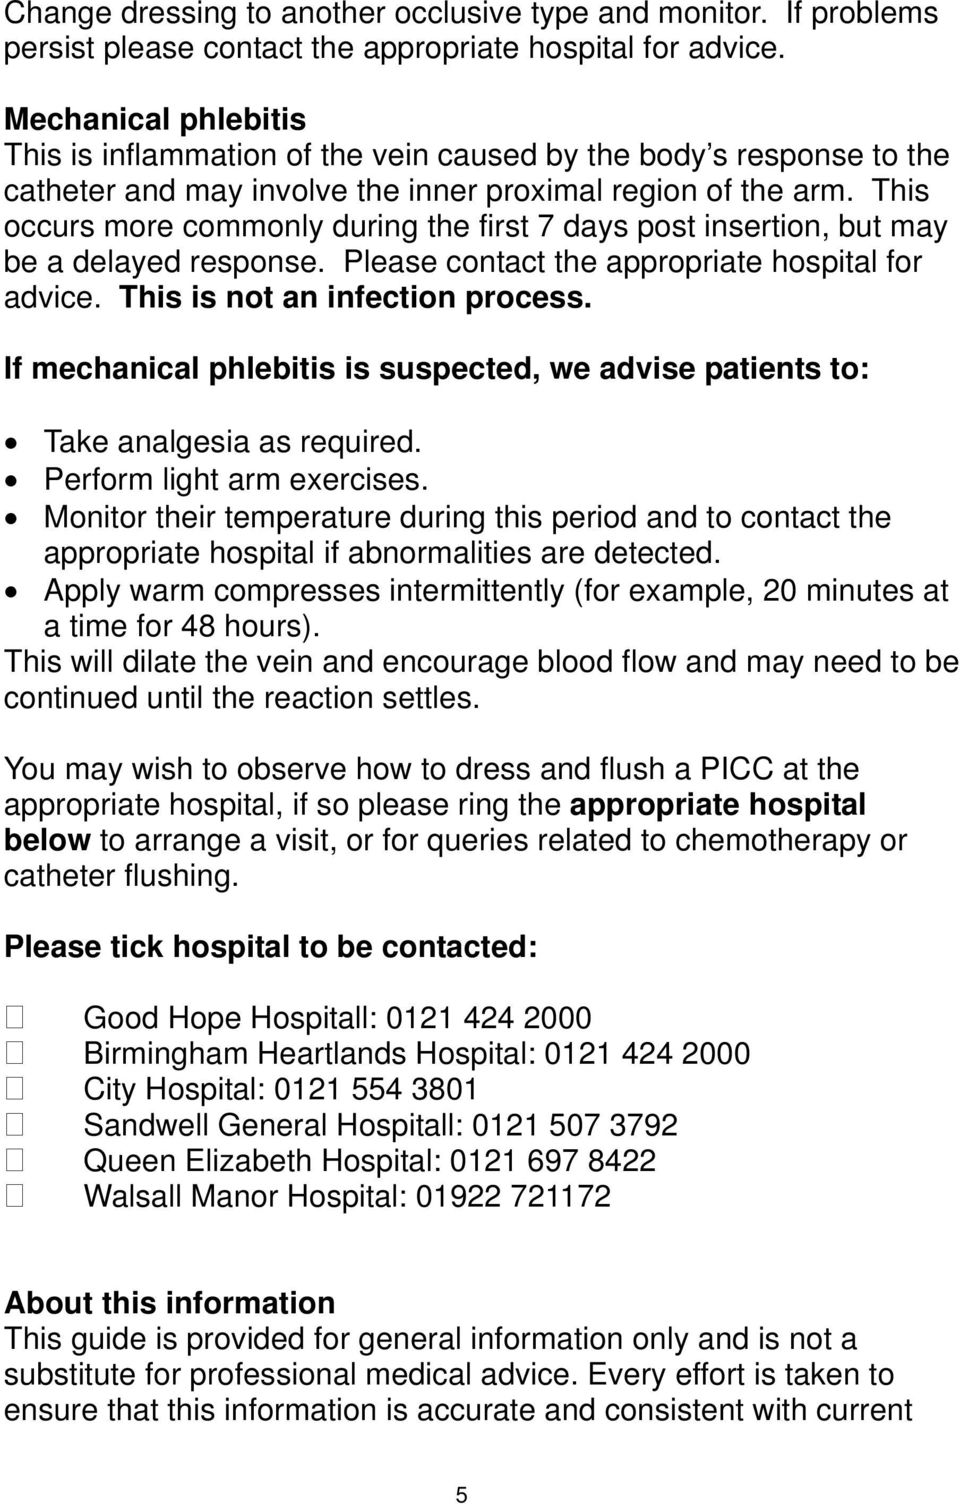 This occurs more commonly during the first 7 days post insertion, but may be a delayed response. Please contact the appropriate hospital for advice. This is not an infection process.